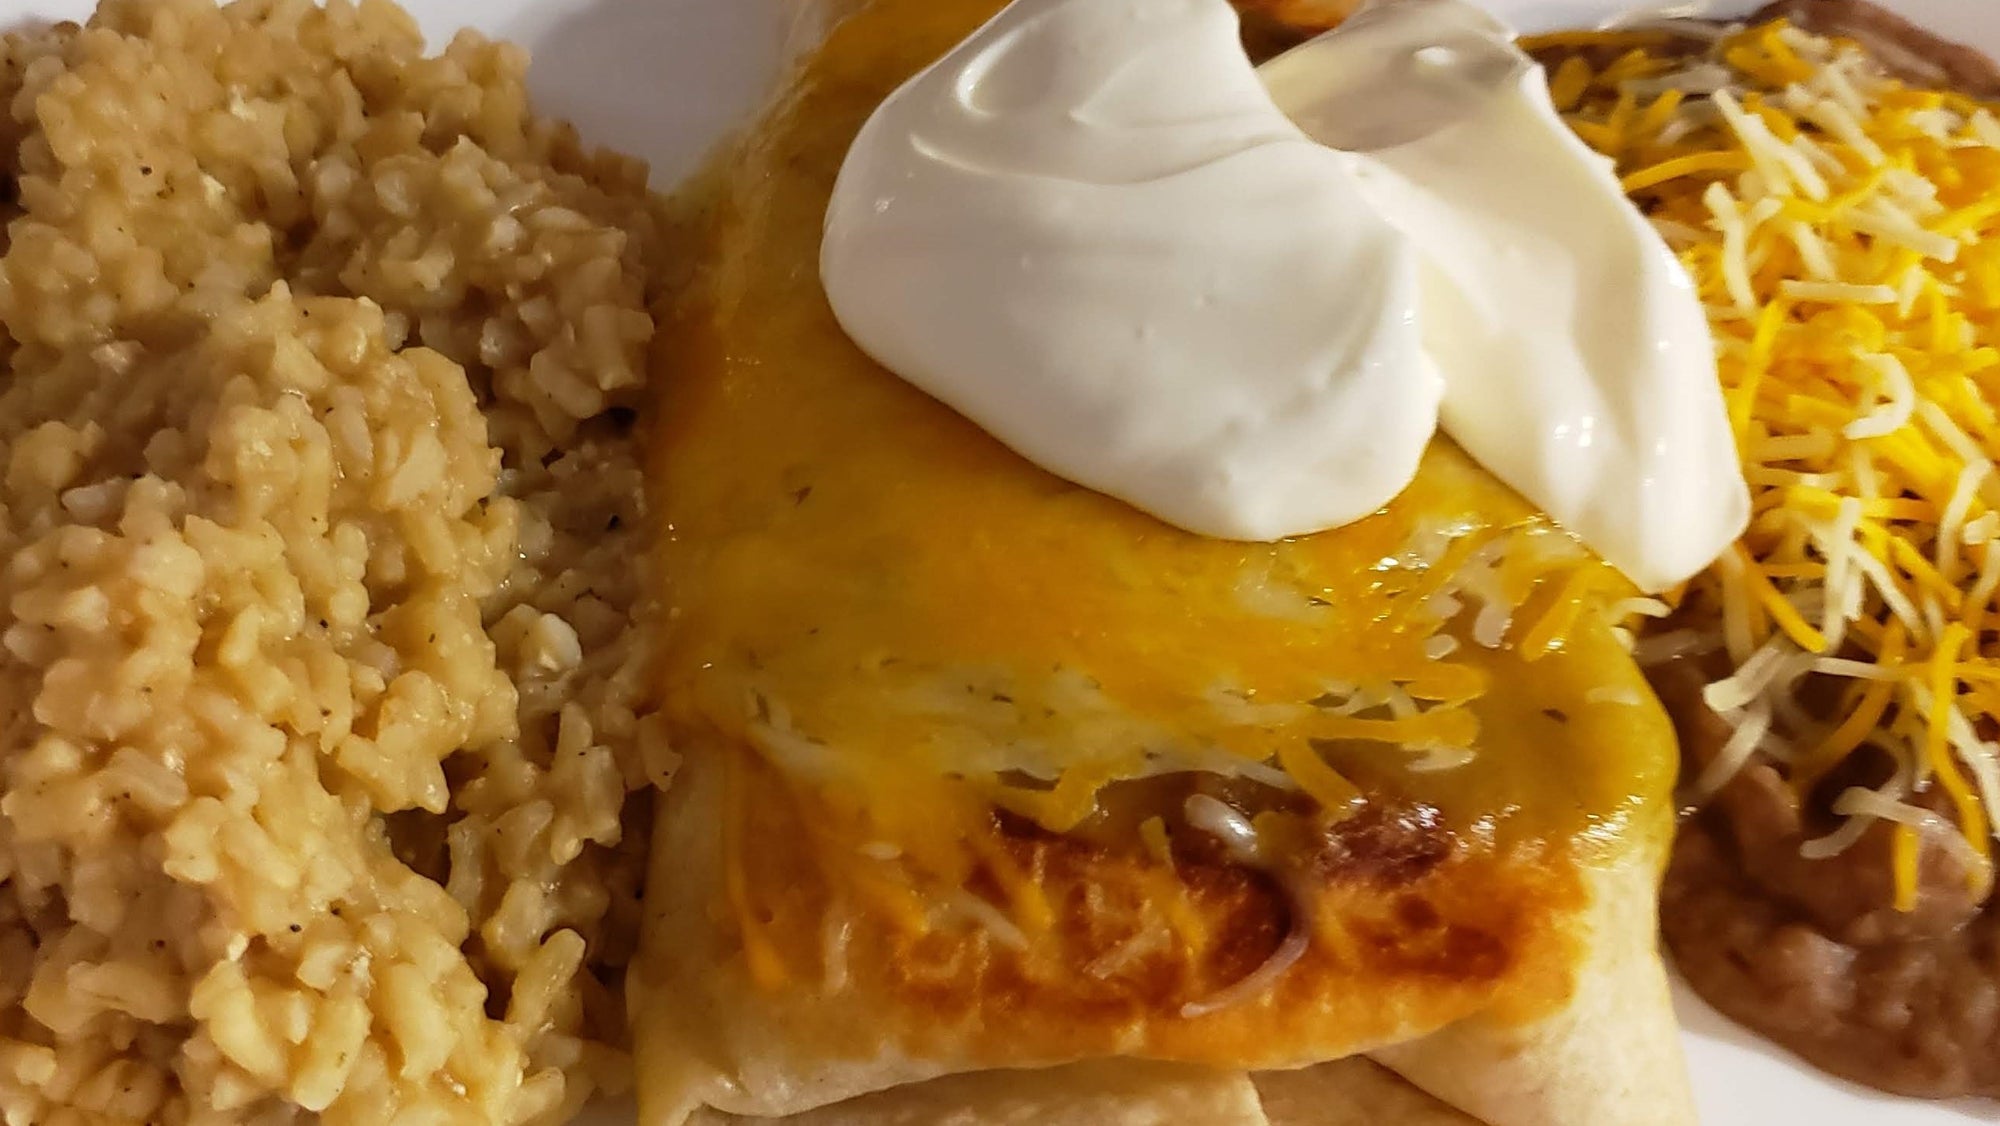 Creamy Chicken Chimichangas with Yellow Pea Rice & Pinto Beans